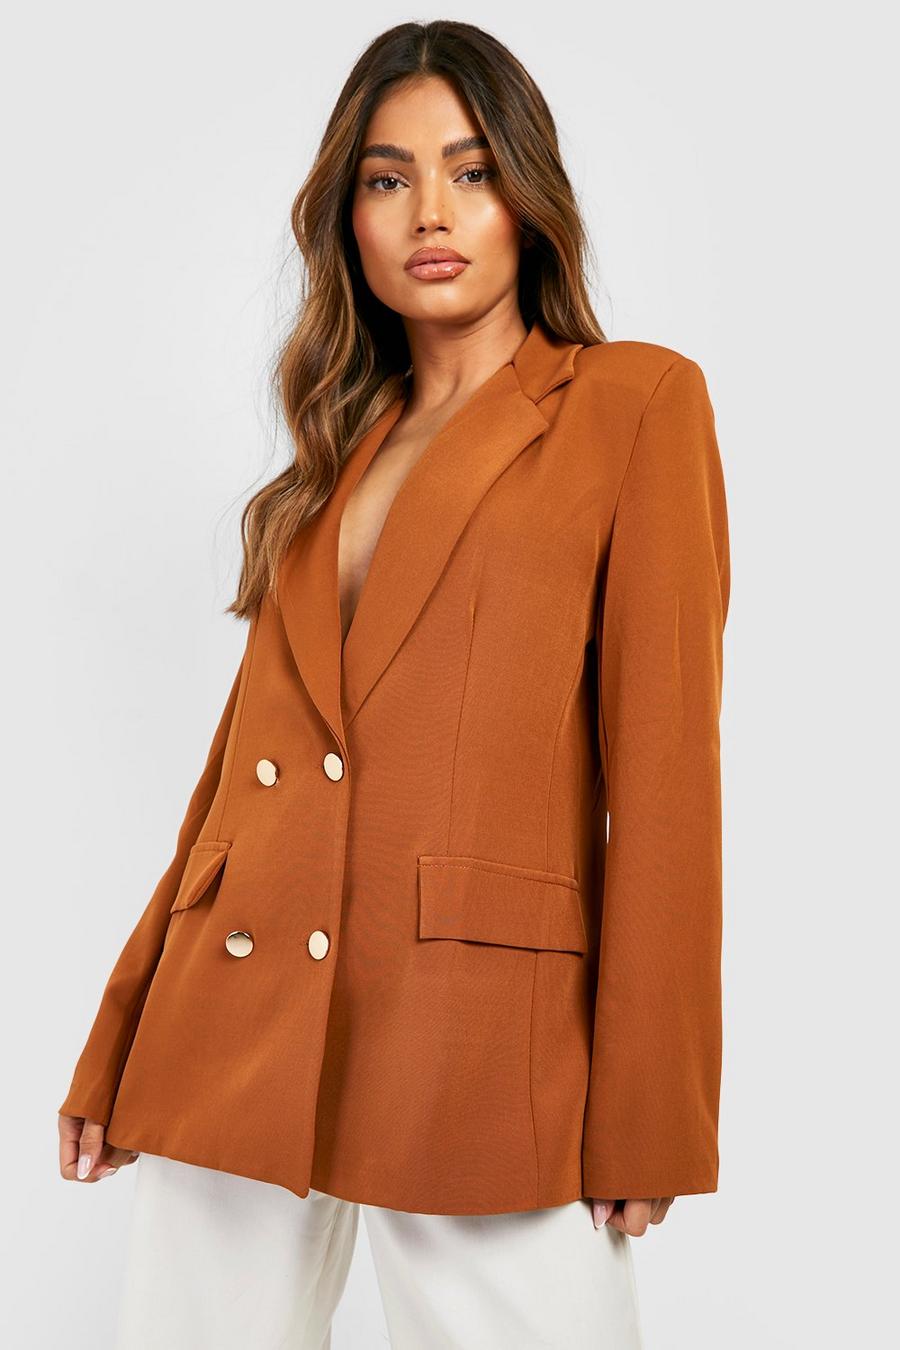 Caramel beige Double Breasted Button Front Blazer